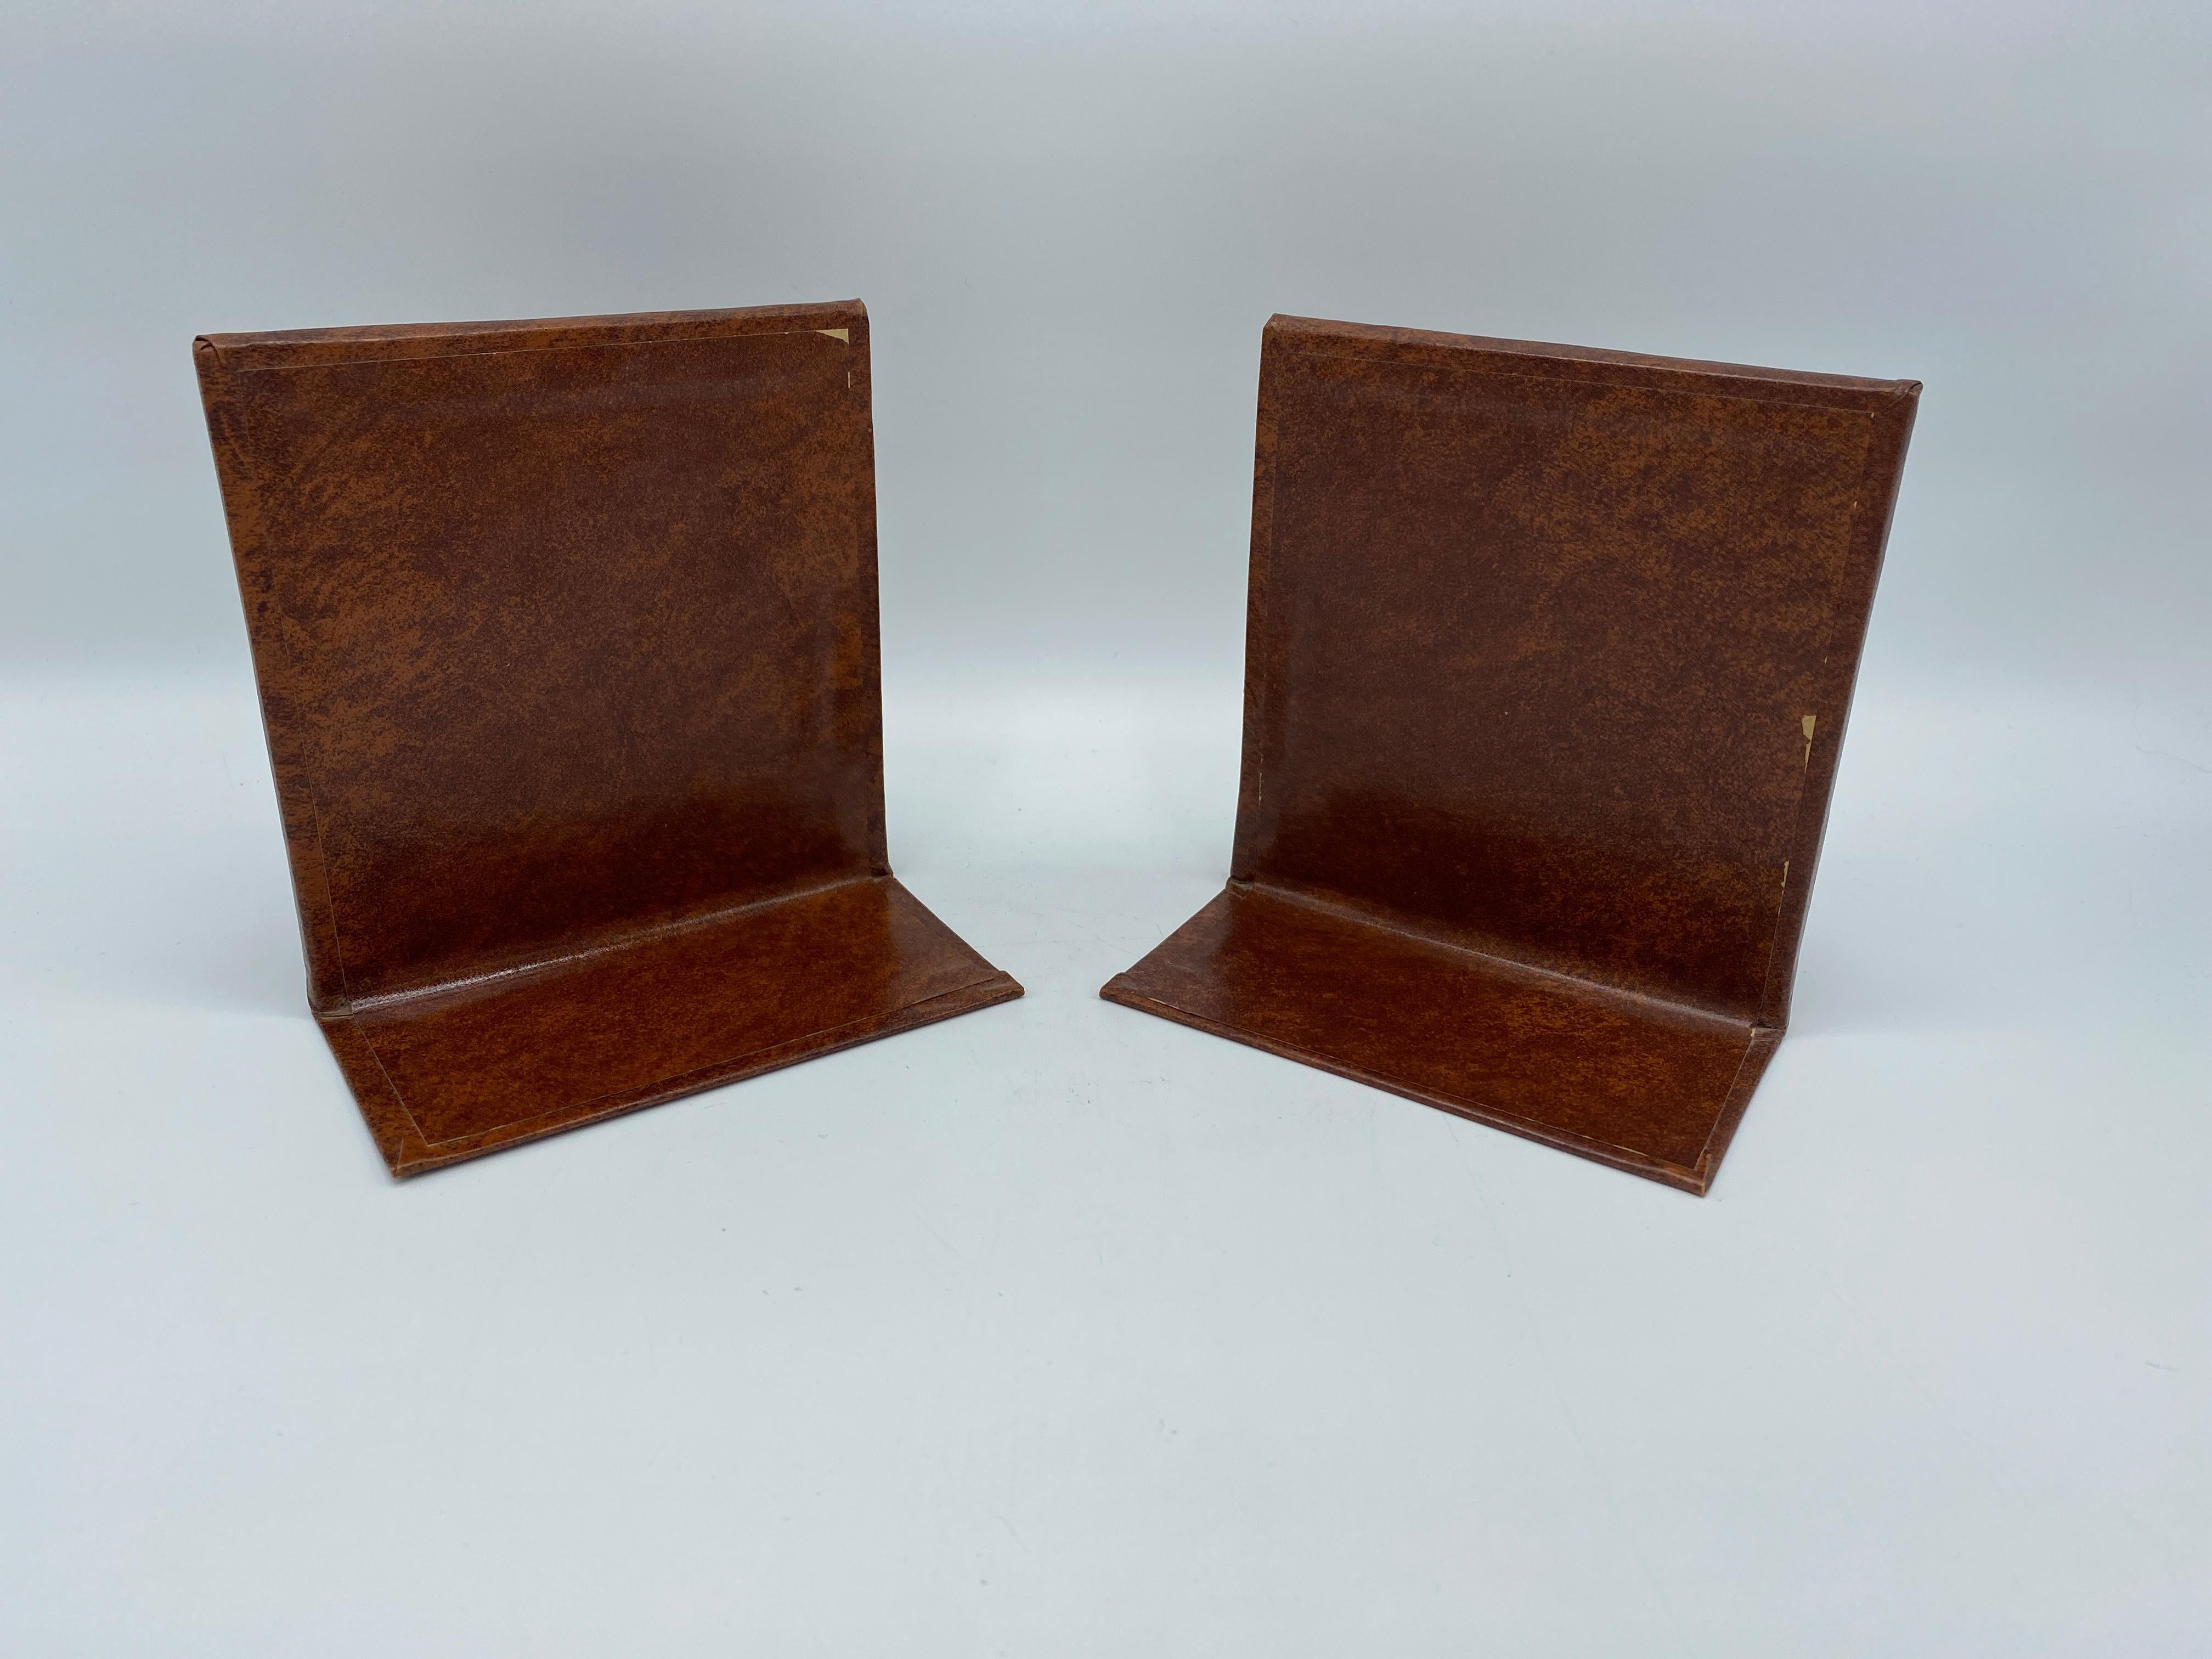 20th Century Italian Leather Bookends with Gold Debossed Border, Pair, 1960s For Sale